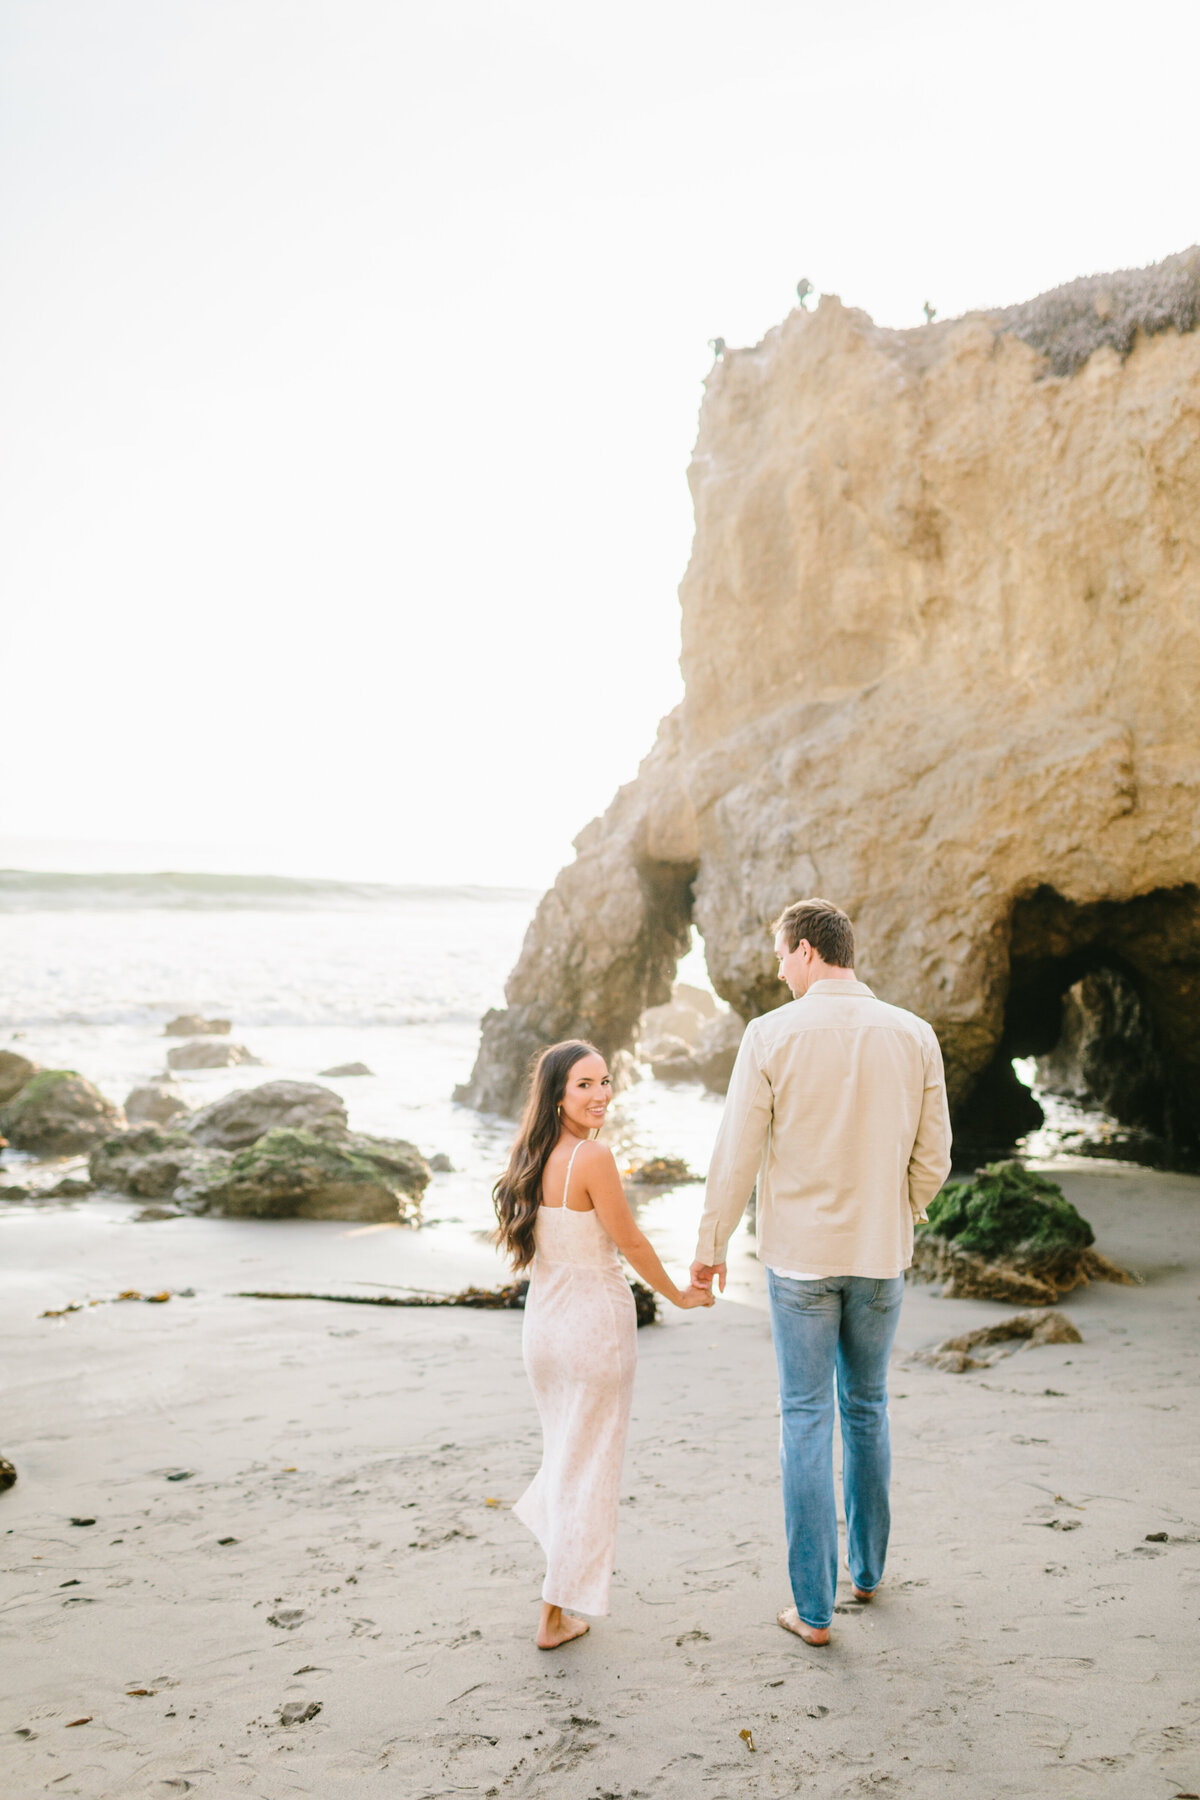 Best California and Texas Engagement Photographer-Jodee Debes Photography-268